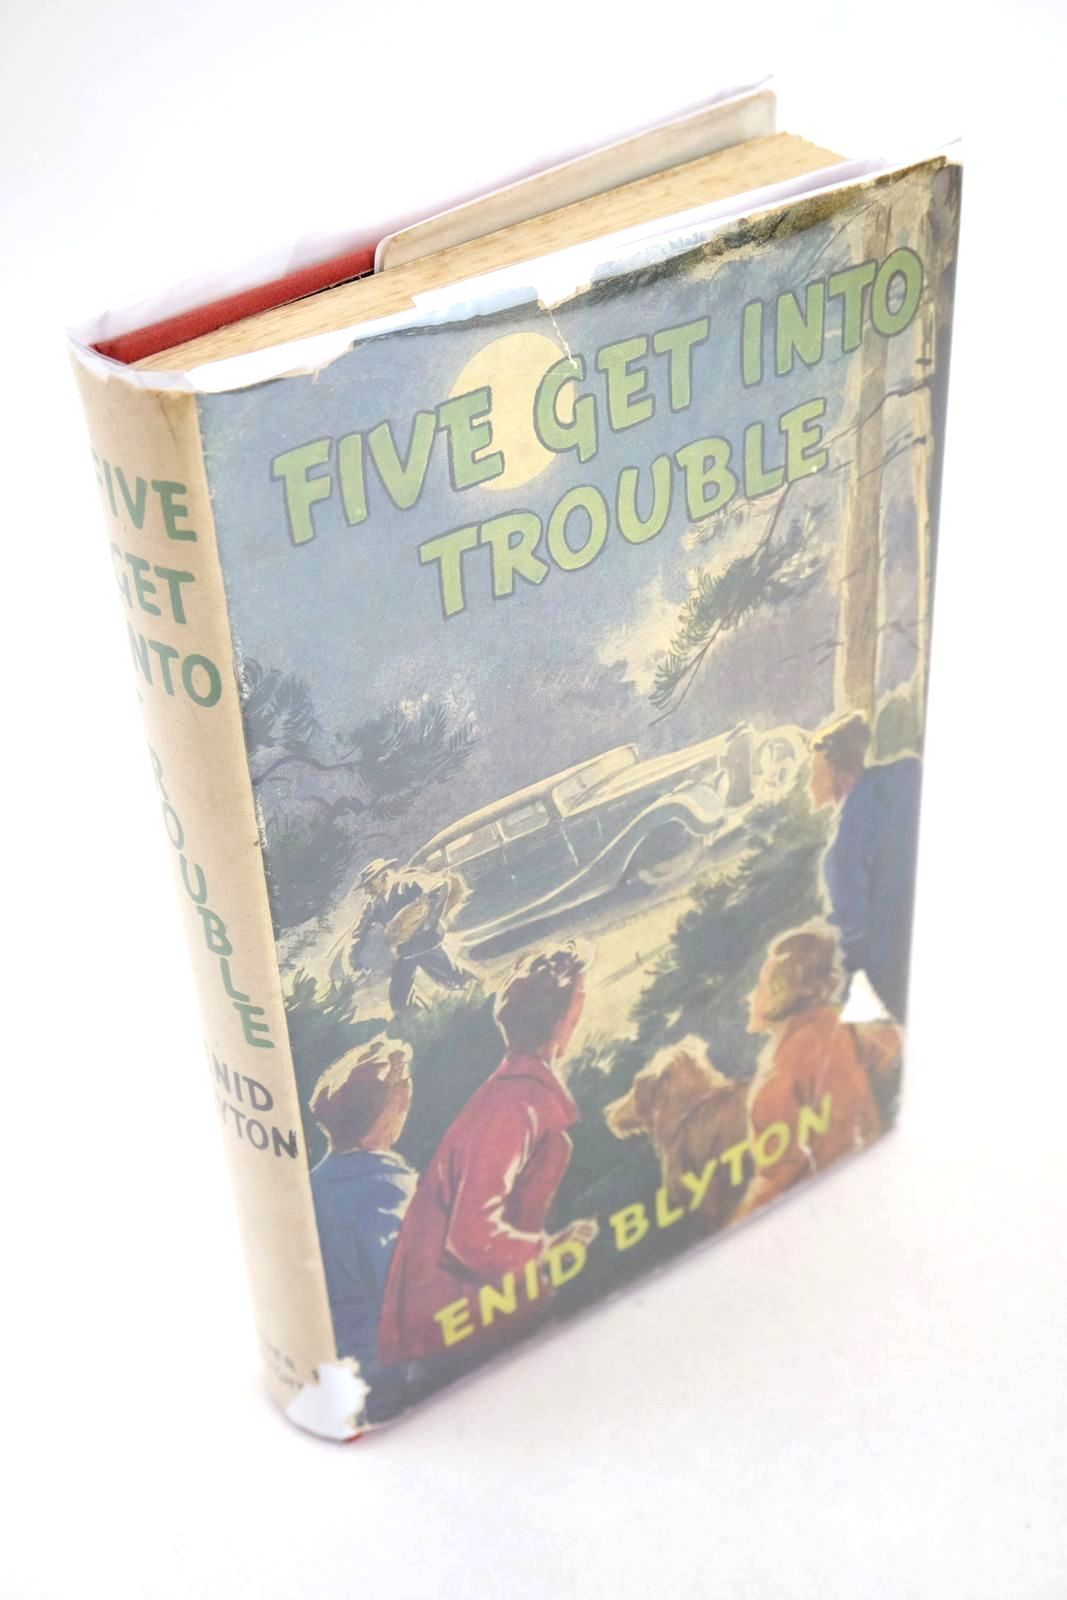 Photo of FIVE GET INTO TROUBLE written by Blyton, Enid illustrated by Soper, Eileen published by Hodder &amp; Stoughton (STOCK CODE: 1326258)  for sale by Stella & Rose's Books